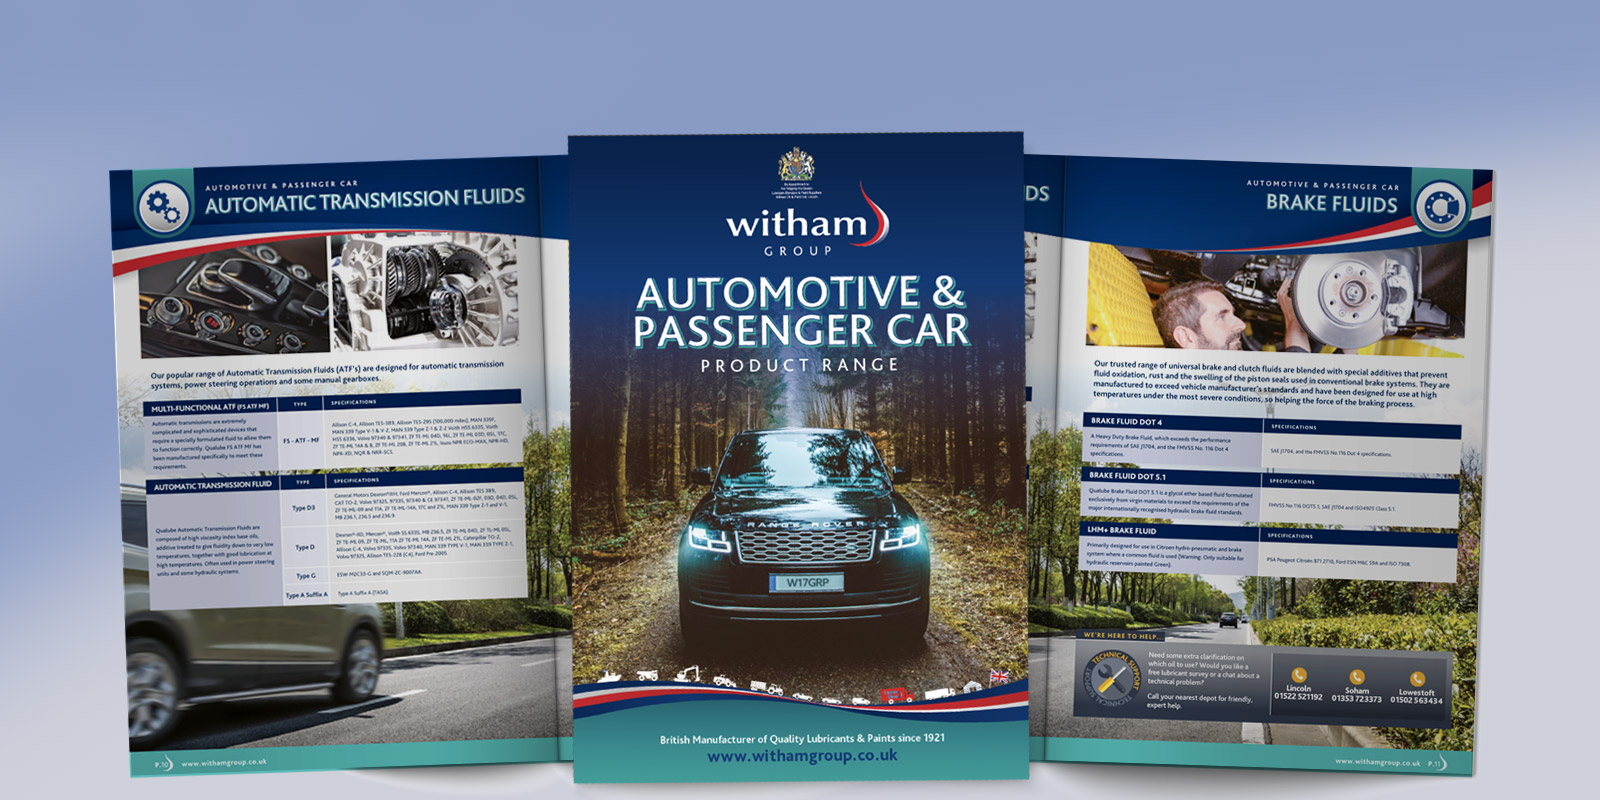 See Our Automative & Passenger Car Brochure